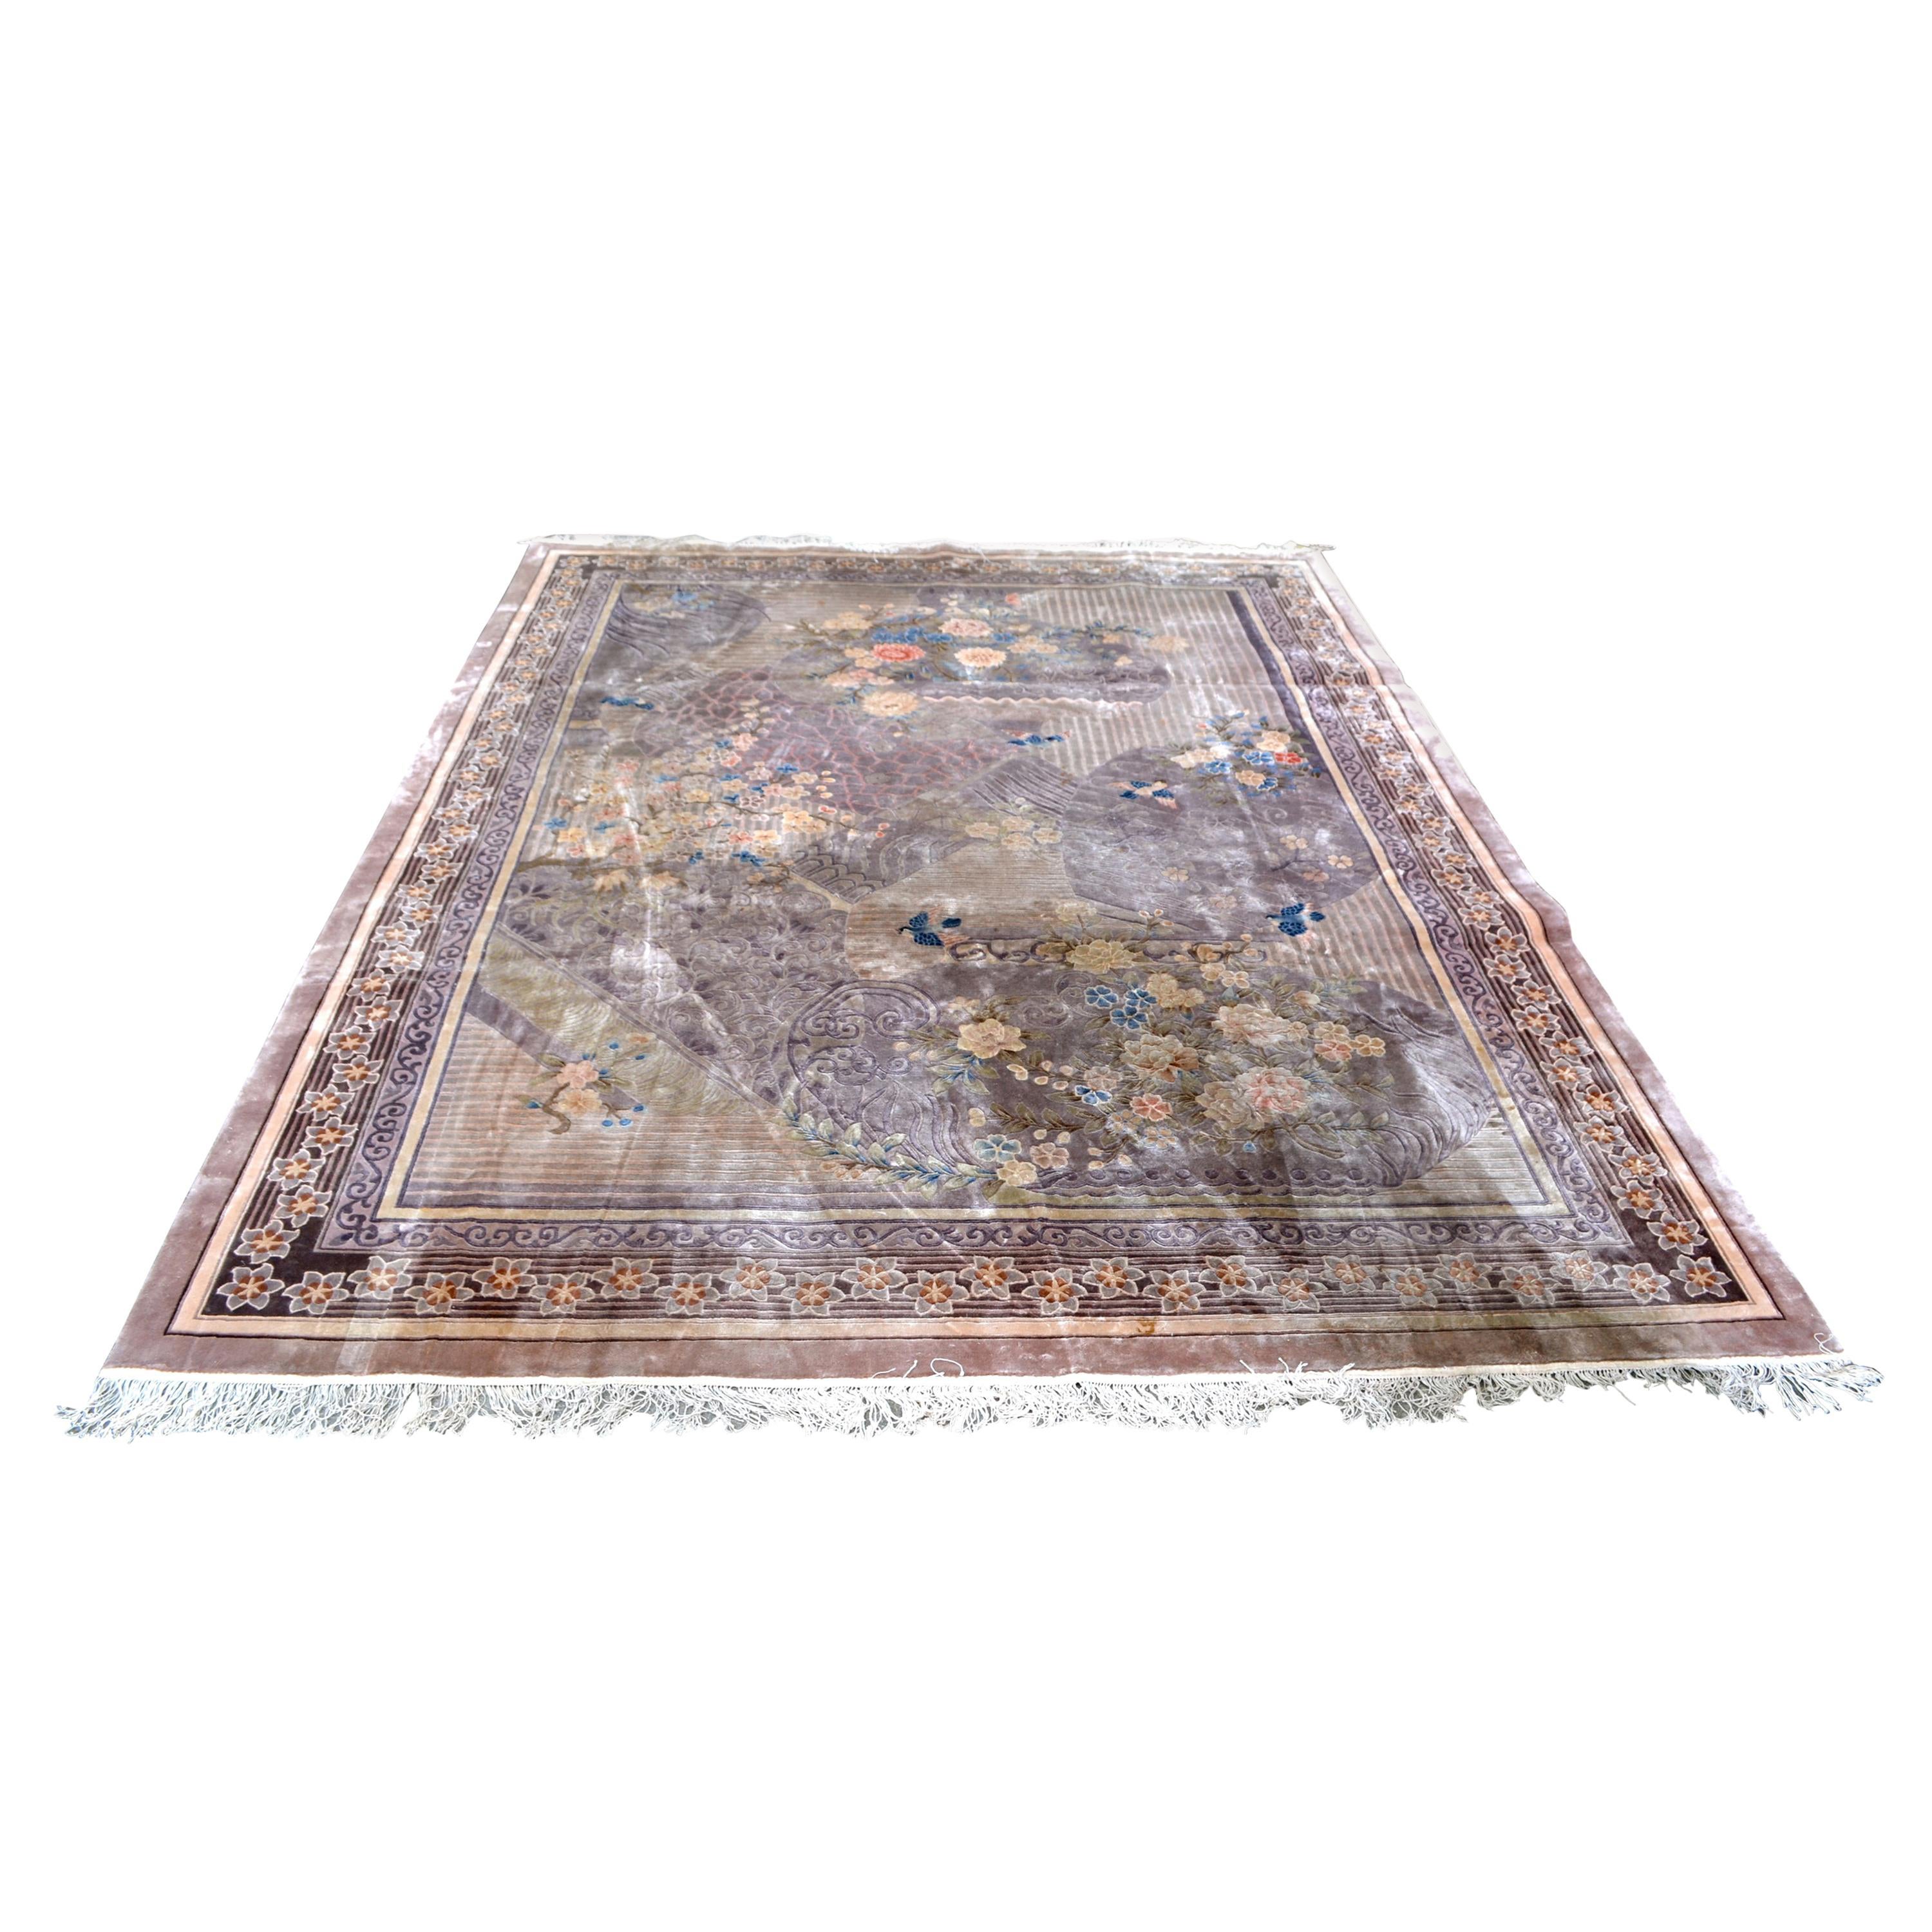  Chinese Imperial Jewel Handwoven  Silk Carpet For Sale